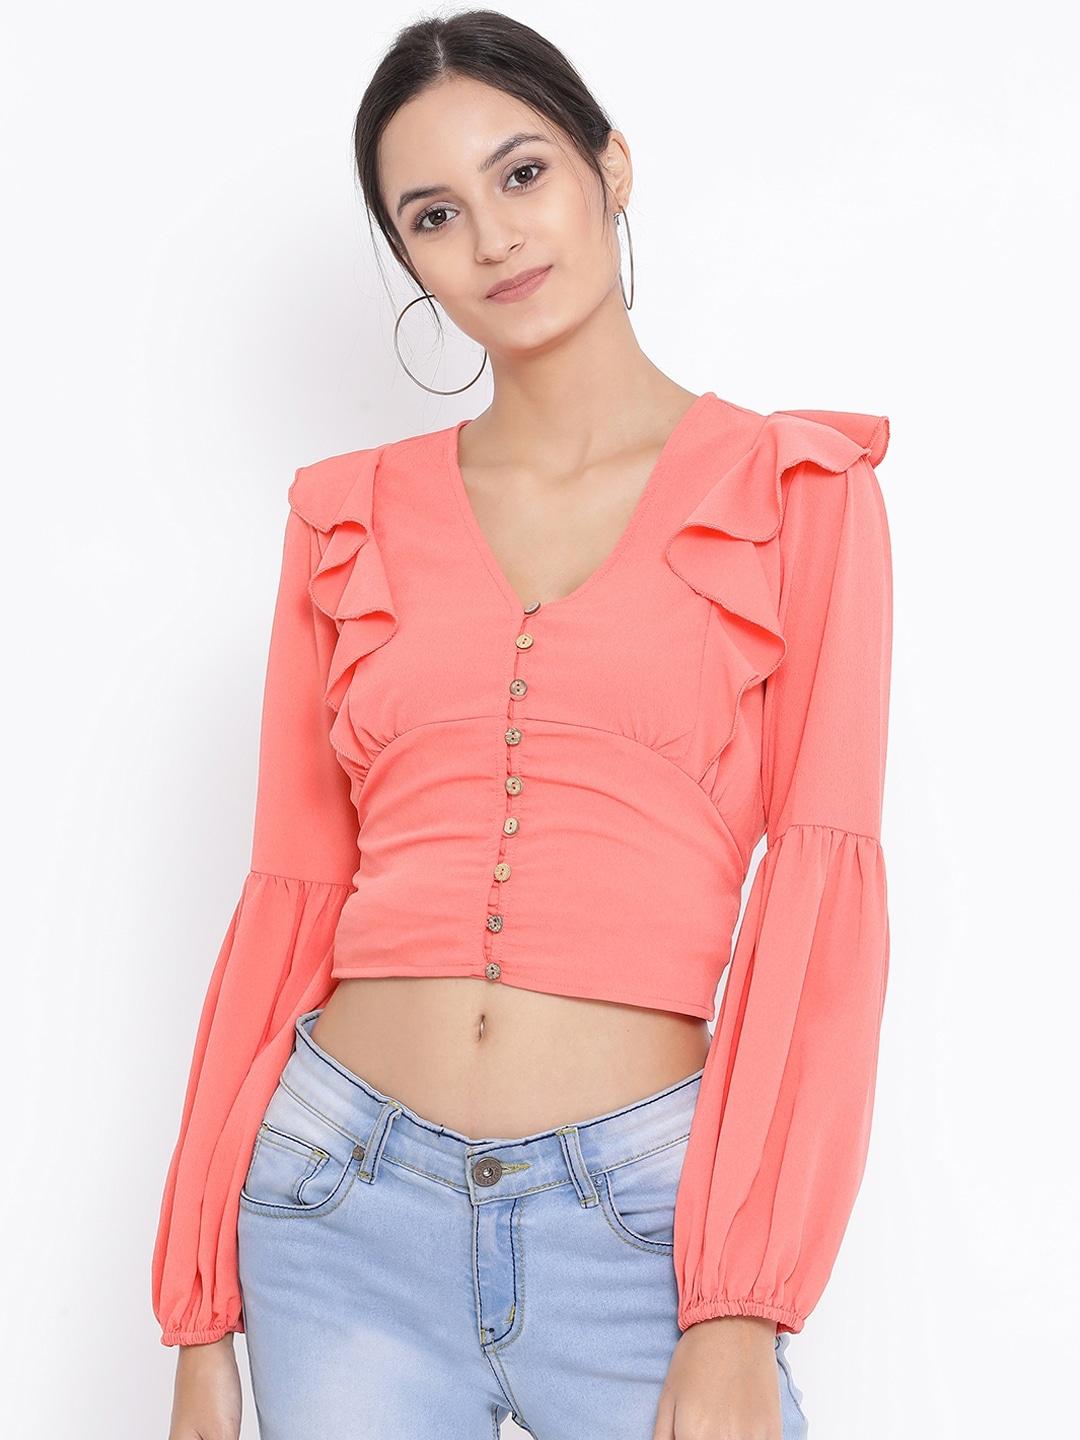 oxolloxo-women-coral-pink-solid-empire-crop-top